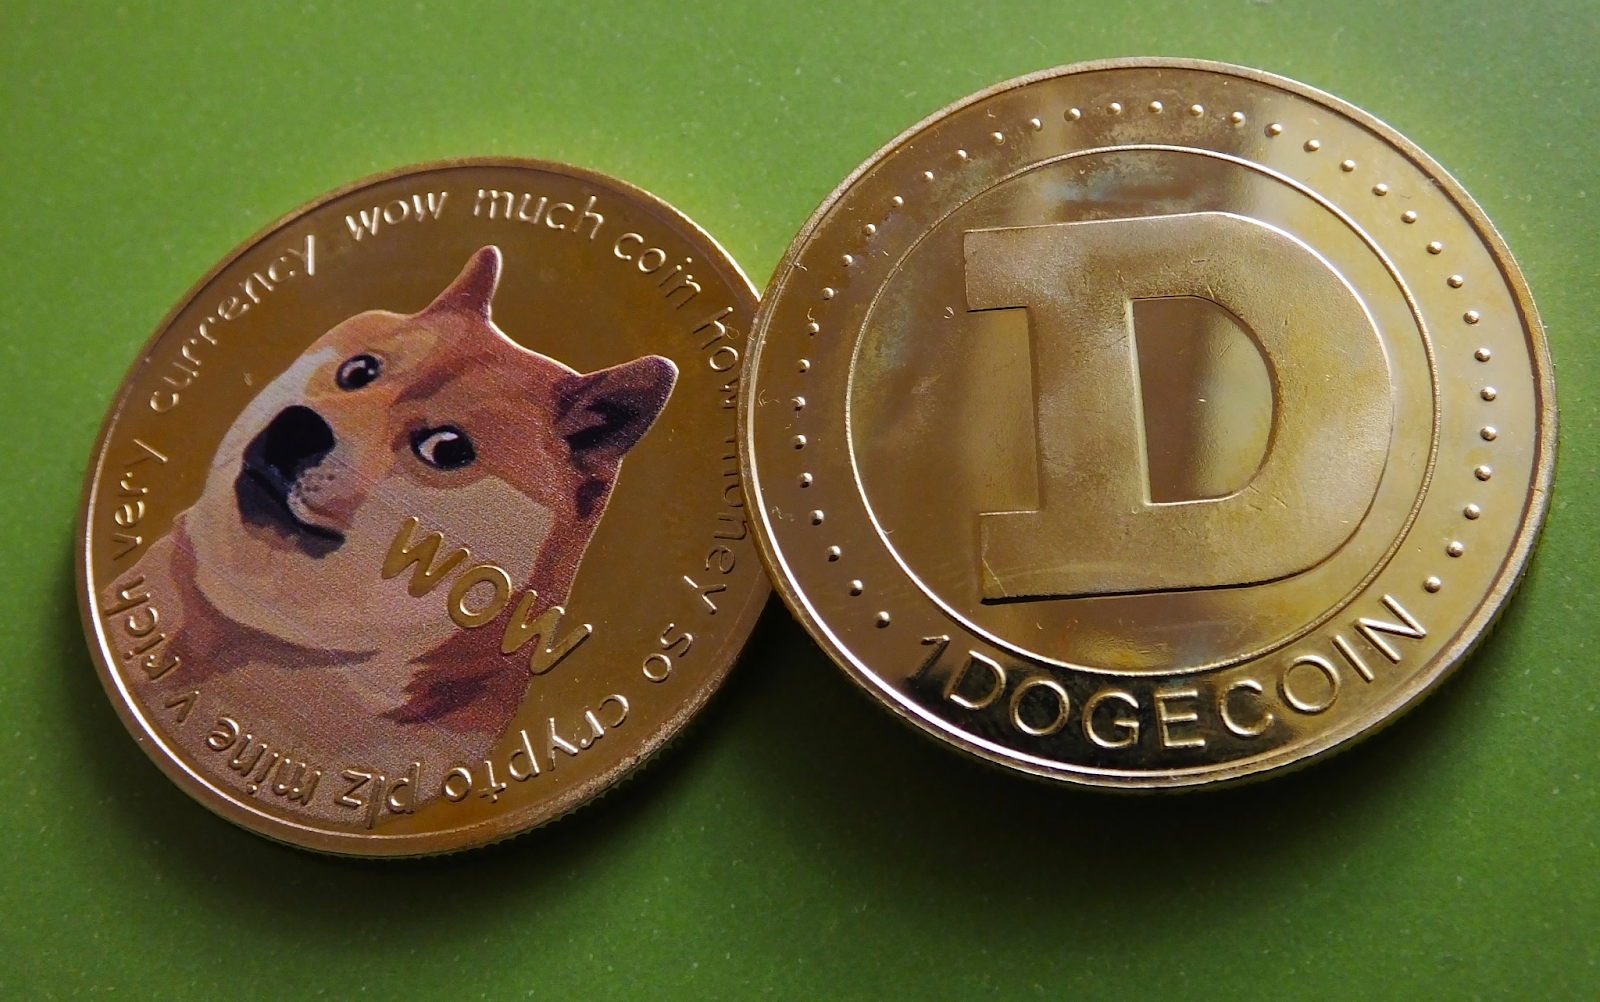 The Dogecoin asset minted as actual coins